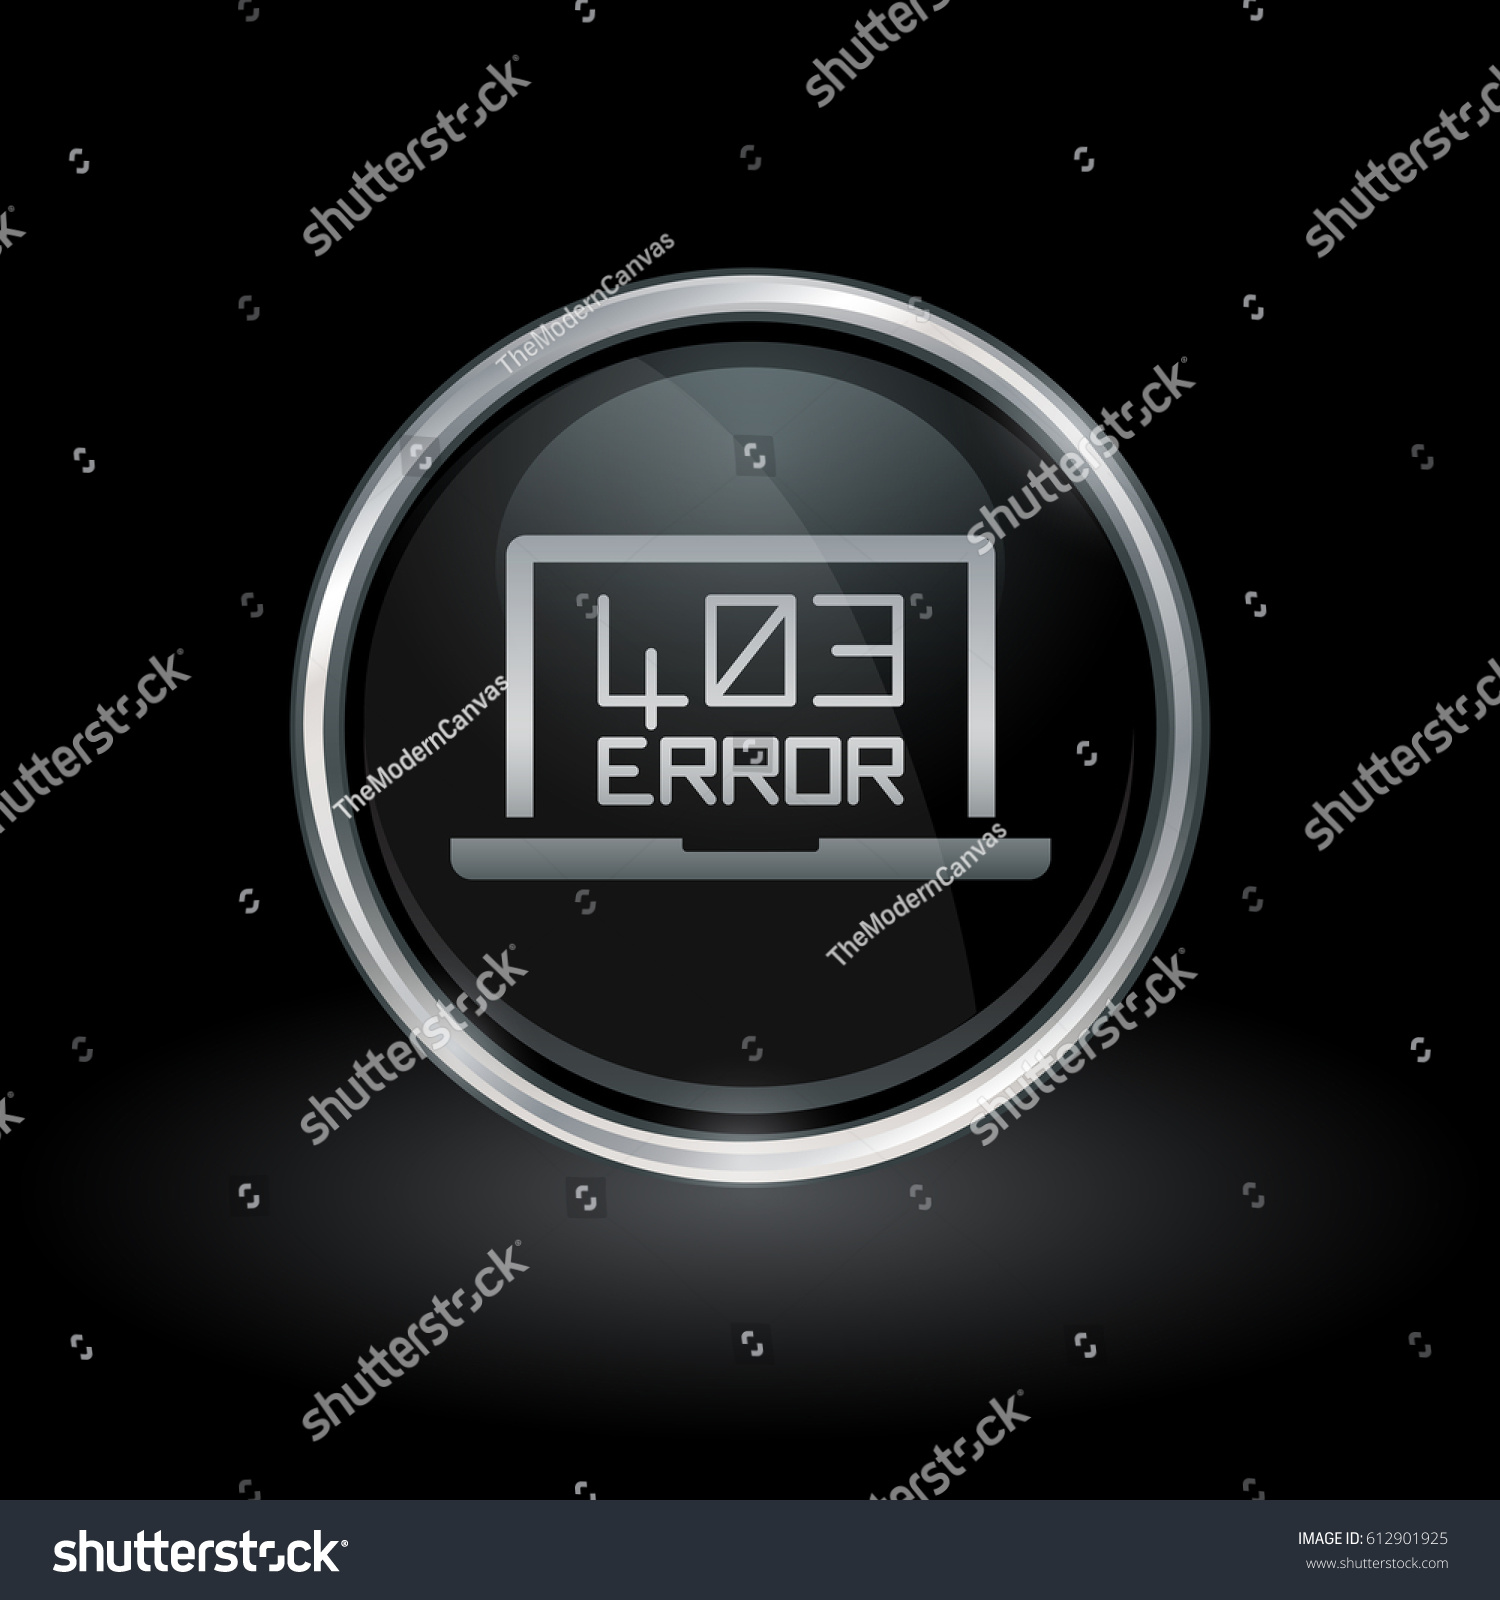 SVG of Laptop webpage error symbol with HTTP Error 403 - Access Forbidden icon inside round chrome silver and black button emblem on black background. Vector illustration. svg